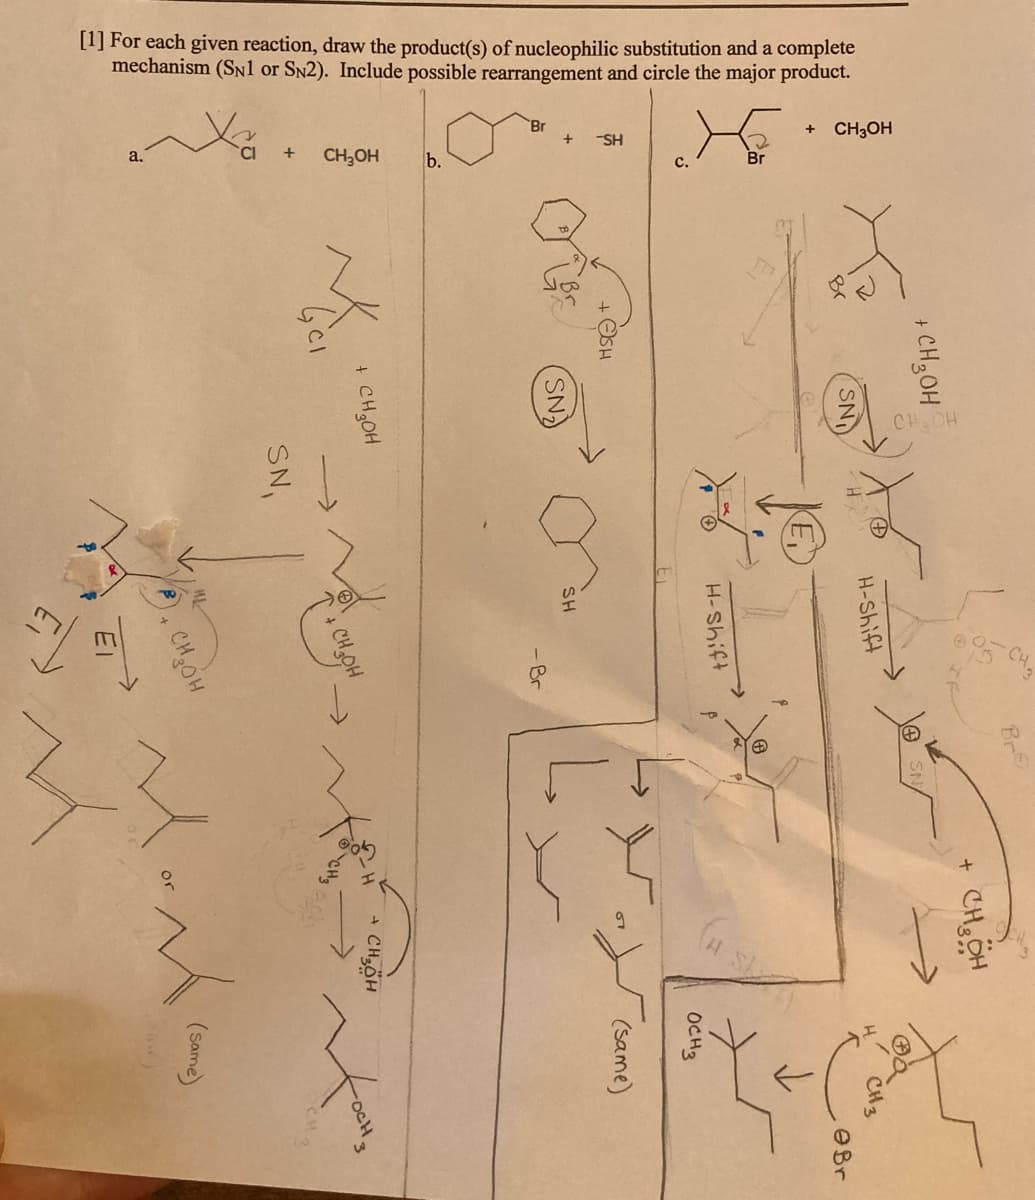 [1] For each given reaction, draw the product(s) of nucleophilic substitution and a complete
mechanism (SN1 or SN2). Include possible rearrangement and circle the major product.
Br
+ CH3OH
-SH
a,
CH,OH
b.
с.
Br
CH CH
CHCH
+ CH3OH
SN
H-Shift
CH3
OBr
H-Shift
OCH2
(same)
(SN)
SH
-Br
+ CH,OH
+ CHÖH
->
-oCH.
SN,
CHOH
El
